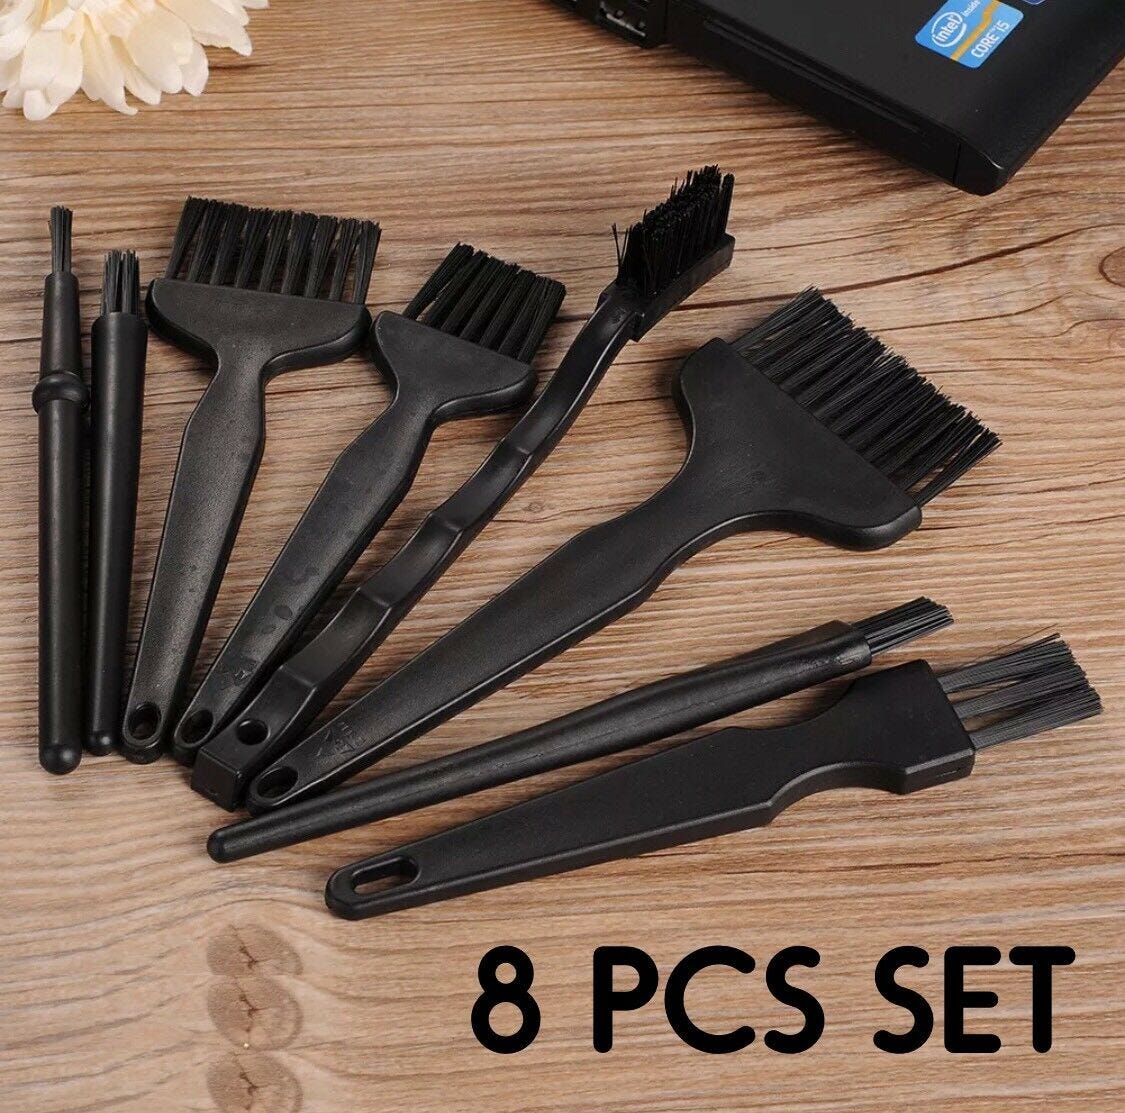 8pcs ESD SMD Anti-static Cleaning Brush Set for Electronic Repair PCB  Soldering | eBay